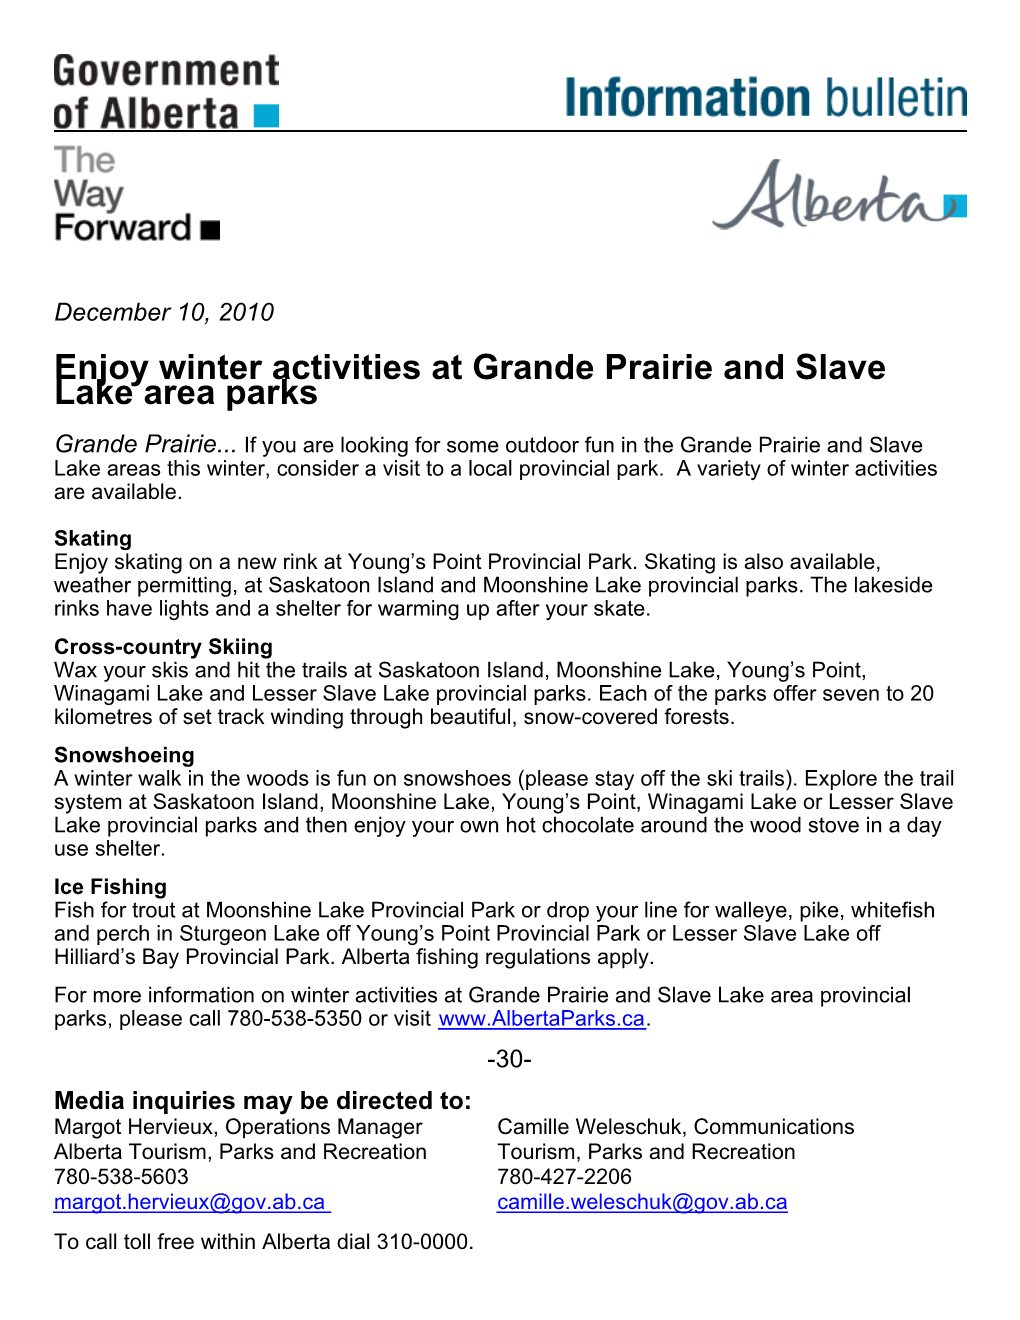 Enjoy Winter Activities at Grande Prairie and Slave Lake Area Parks